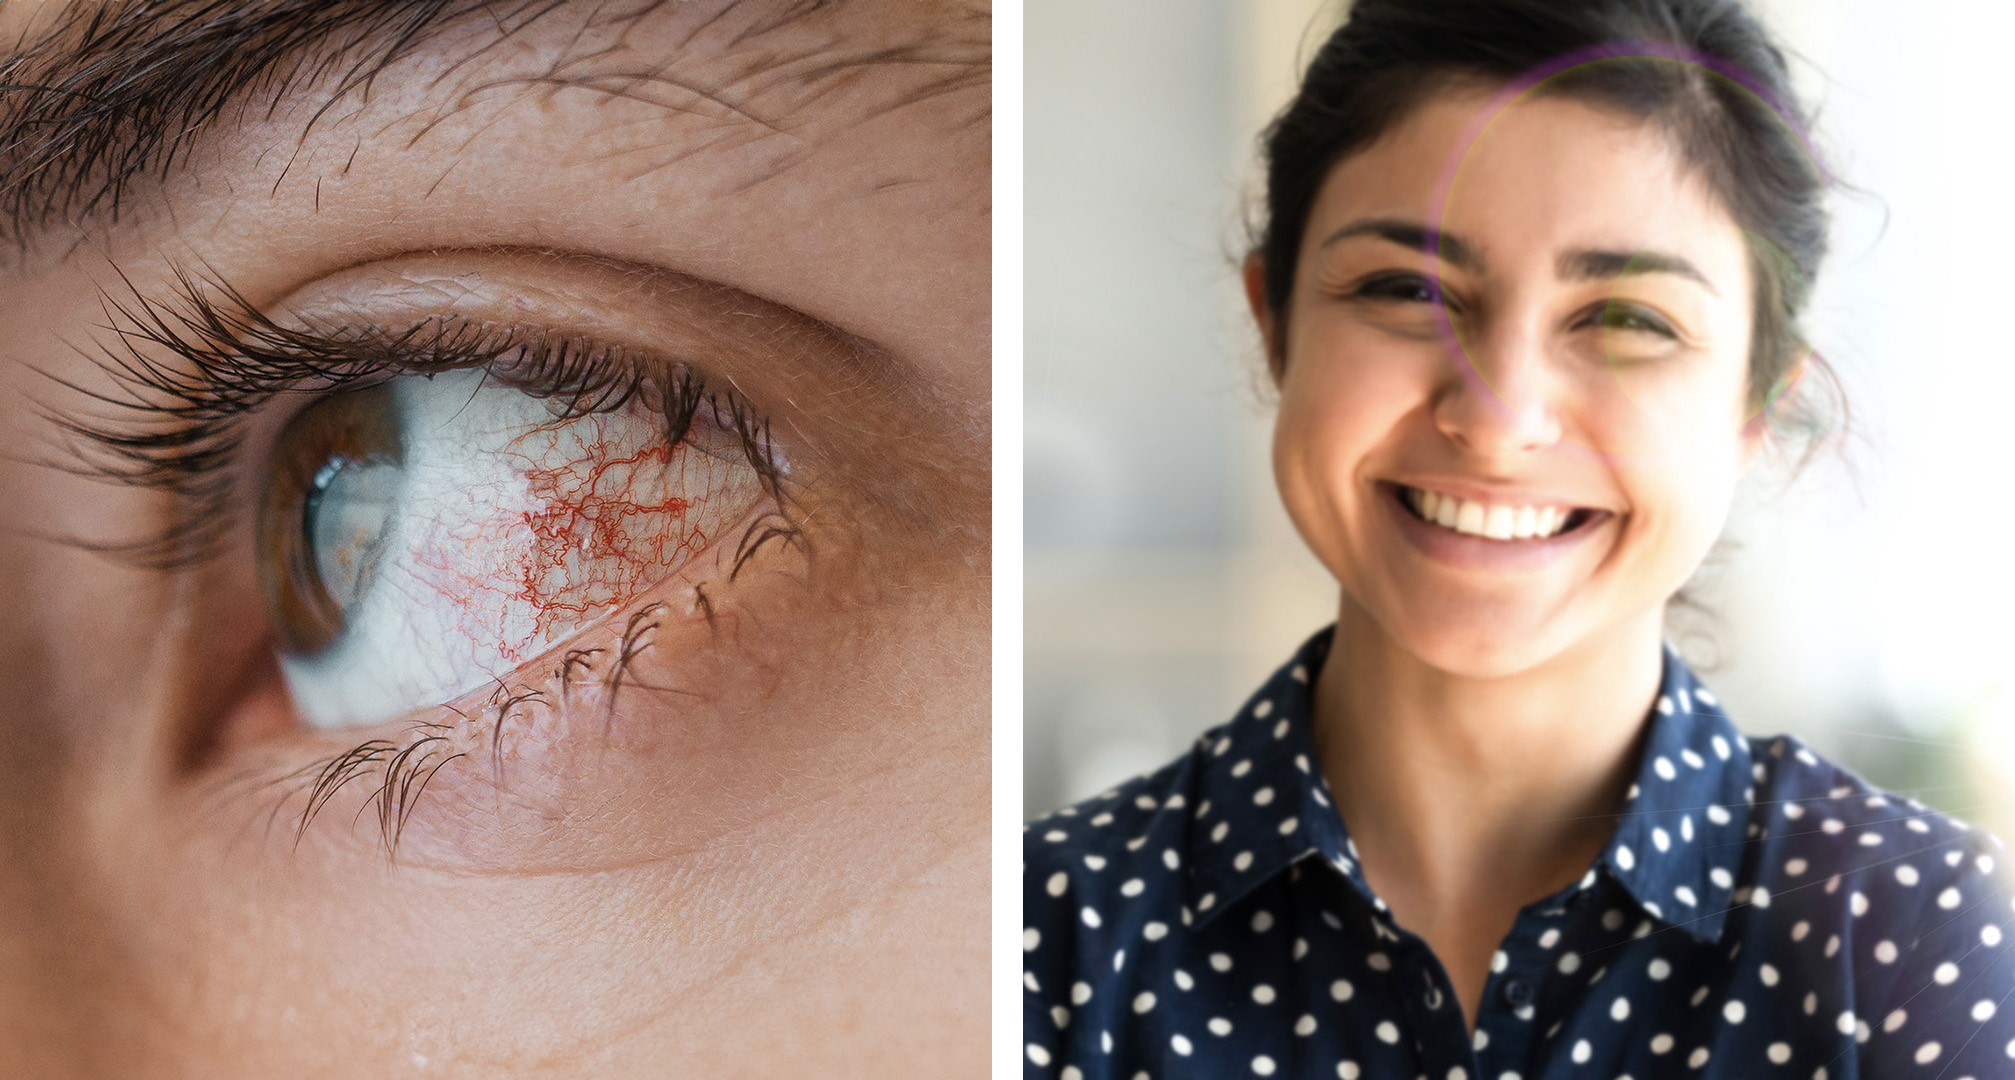 Photokeratitis might lead to red or bloodshot eyes (left). While not always the case, it can lead to blurry vision or symptoms like seeing halos in the visual field (right).